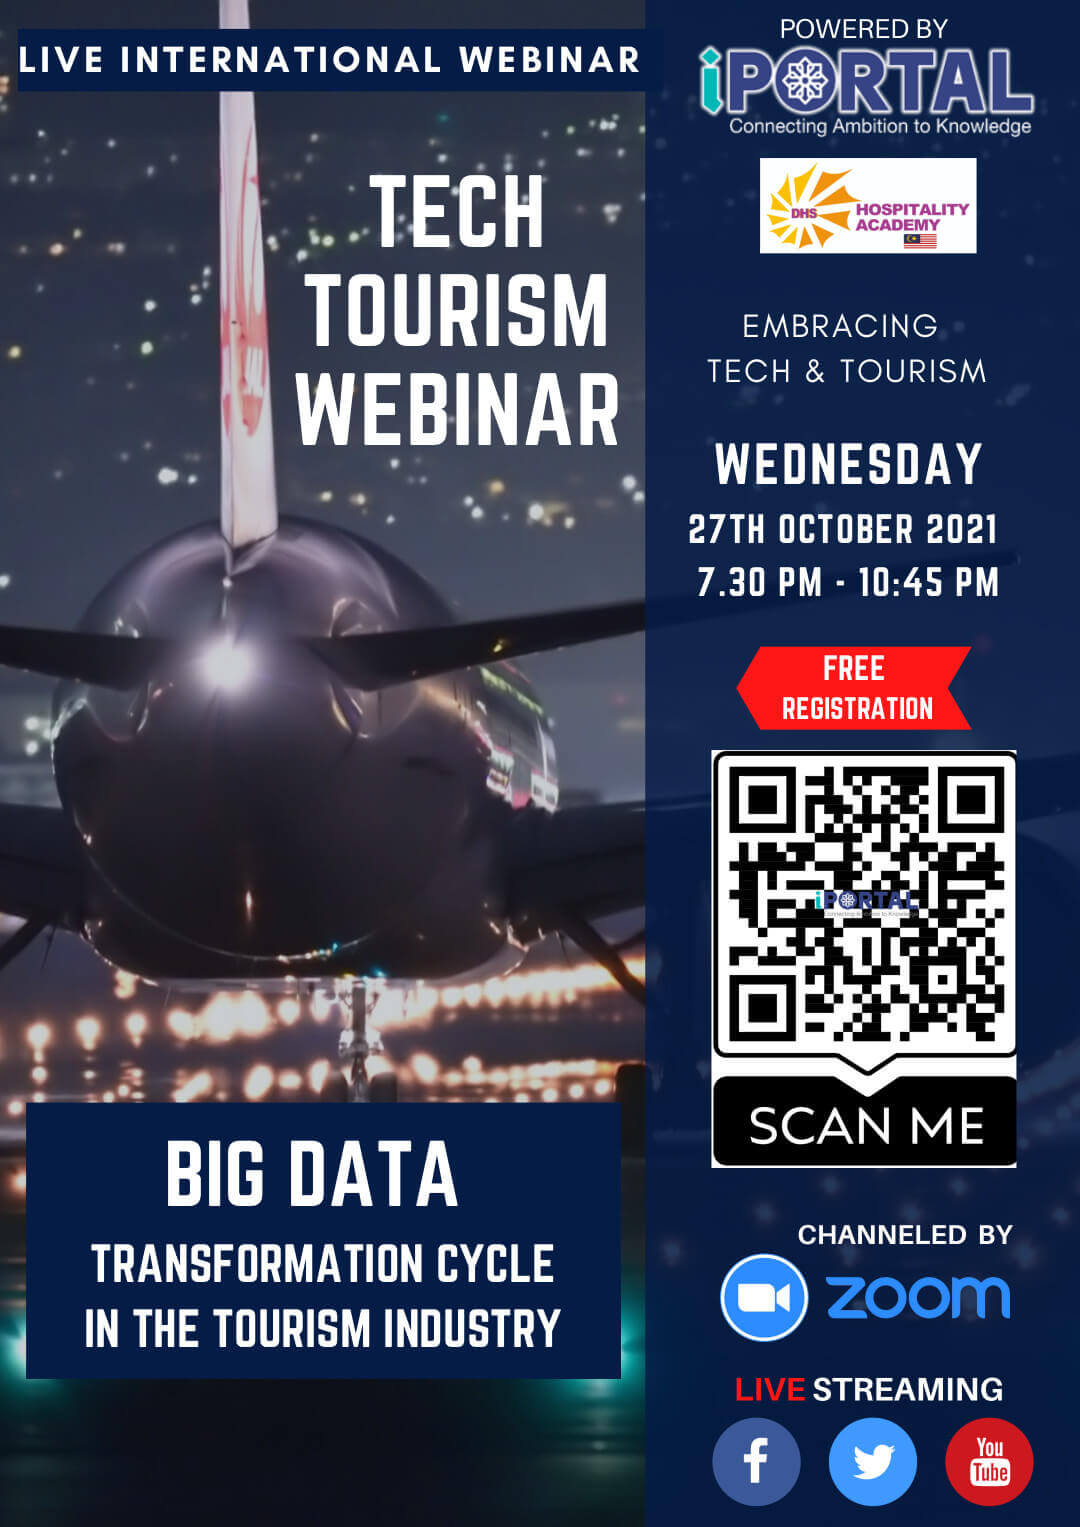 Tech Tourism Webinar: Big Data - Transformation Cycle in the Tourism Industry (October 27, 2021)